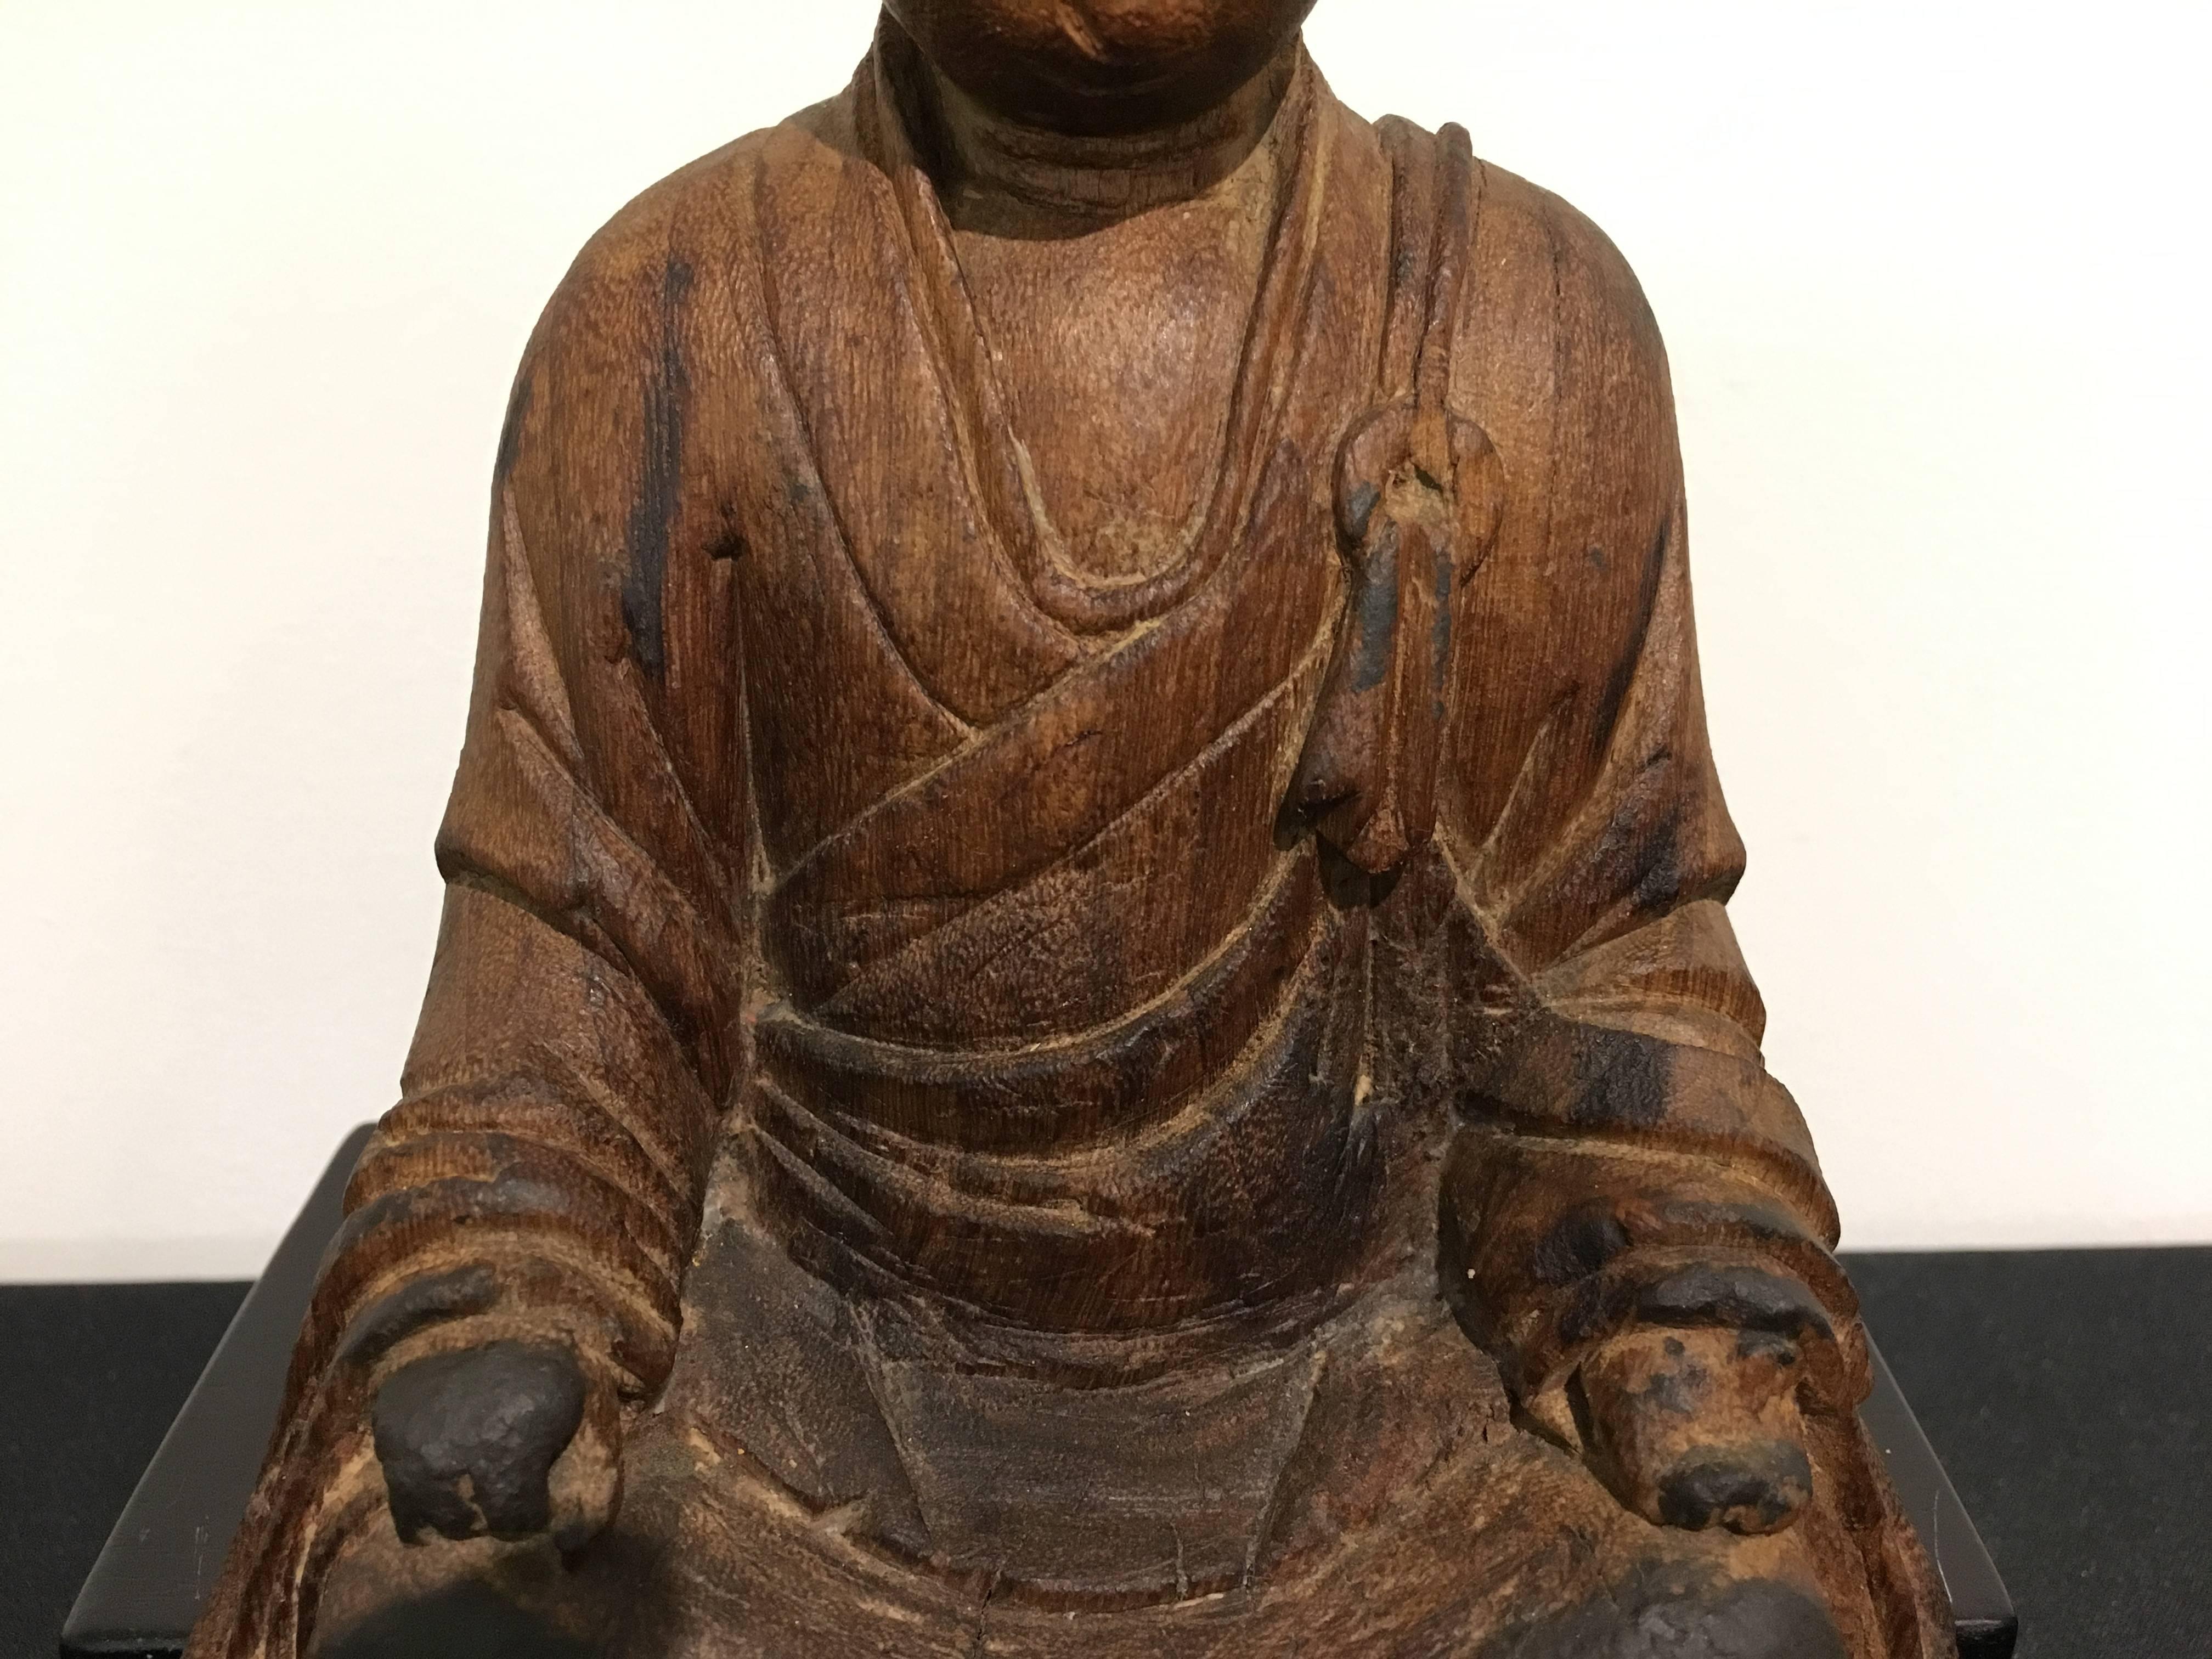 Chinese Carved Wood Figure of Ksitigarbha, Yuan Dynasty, 14th Century 3